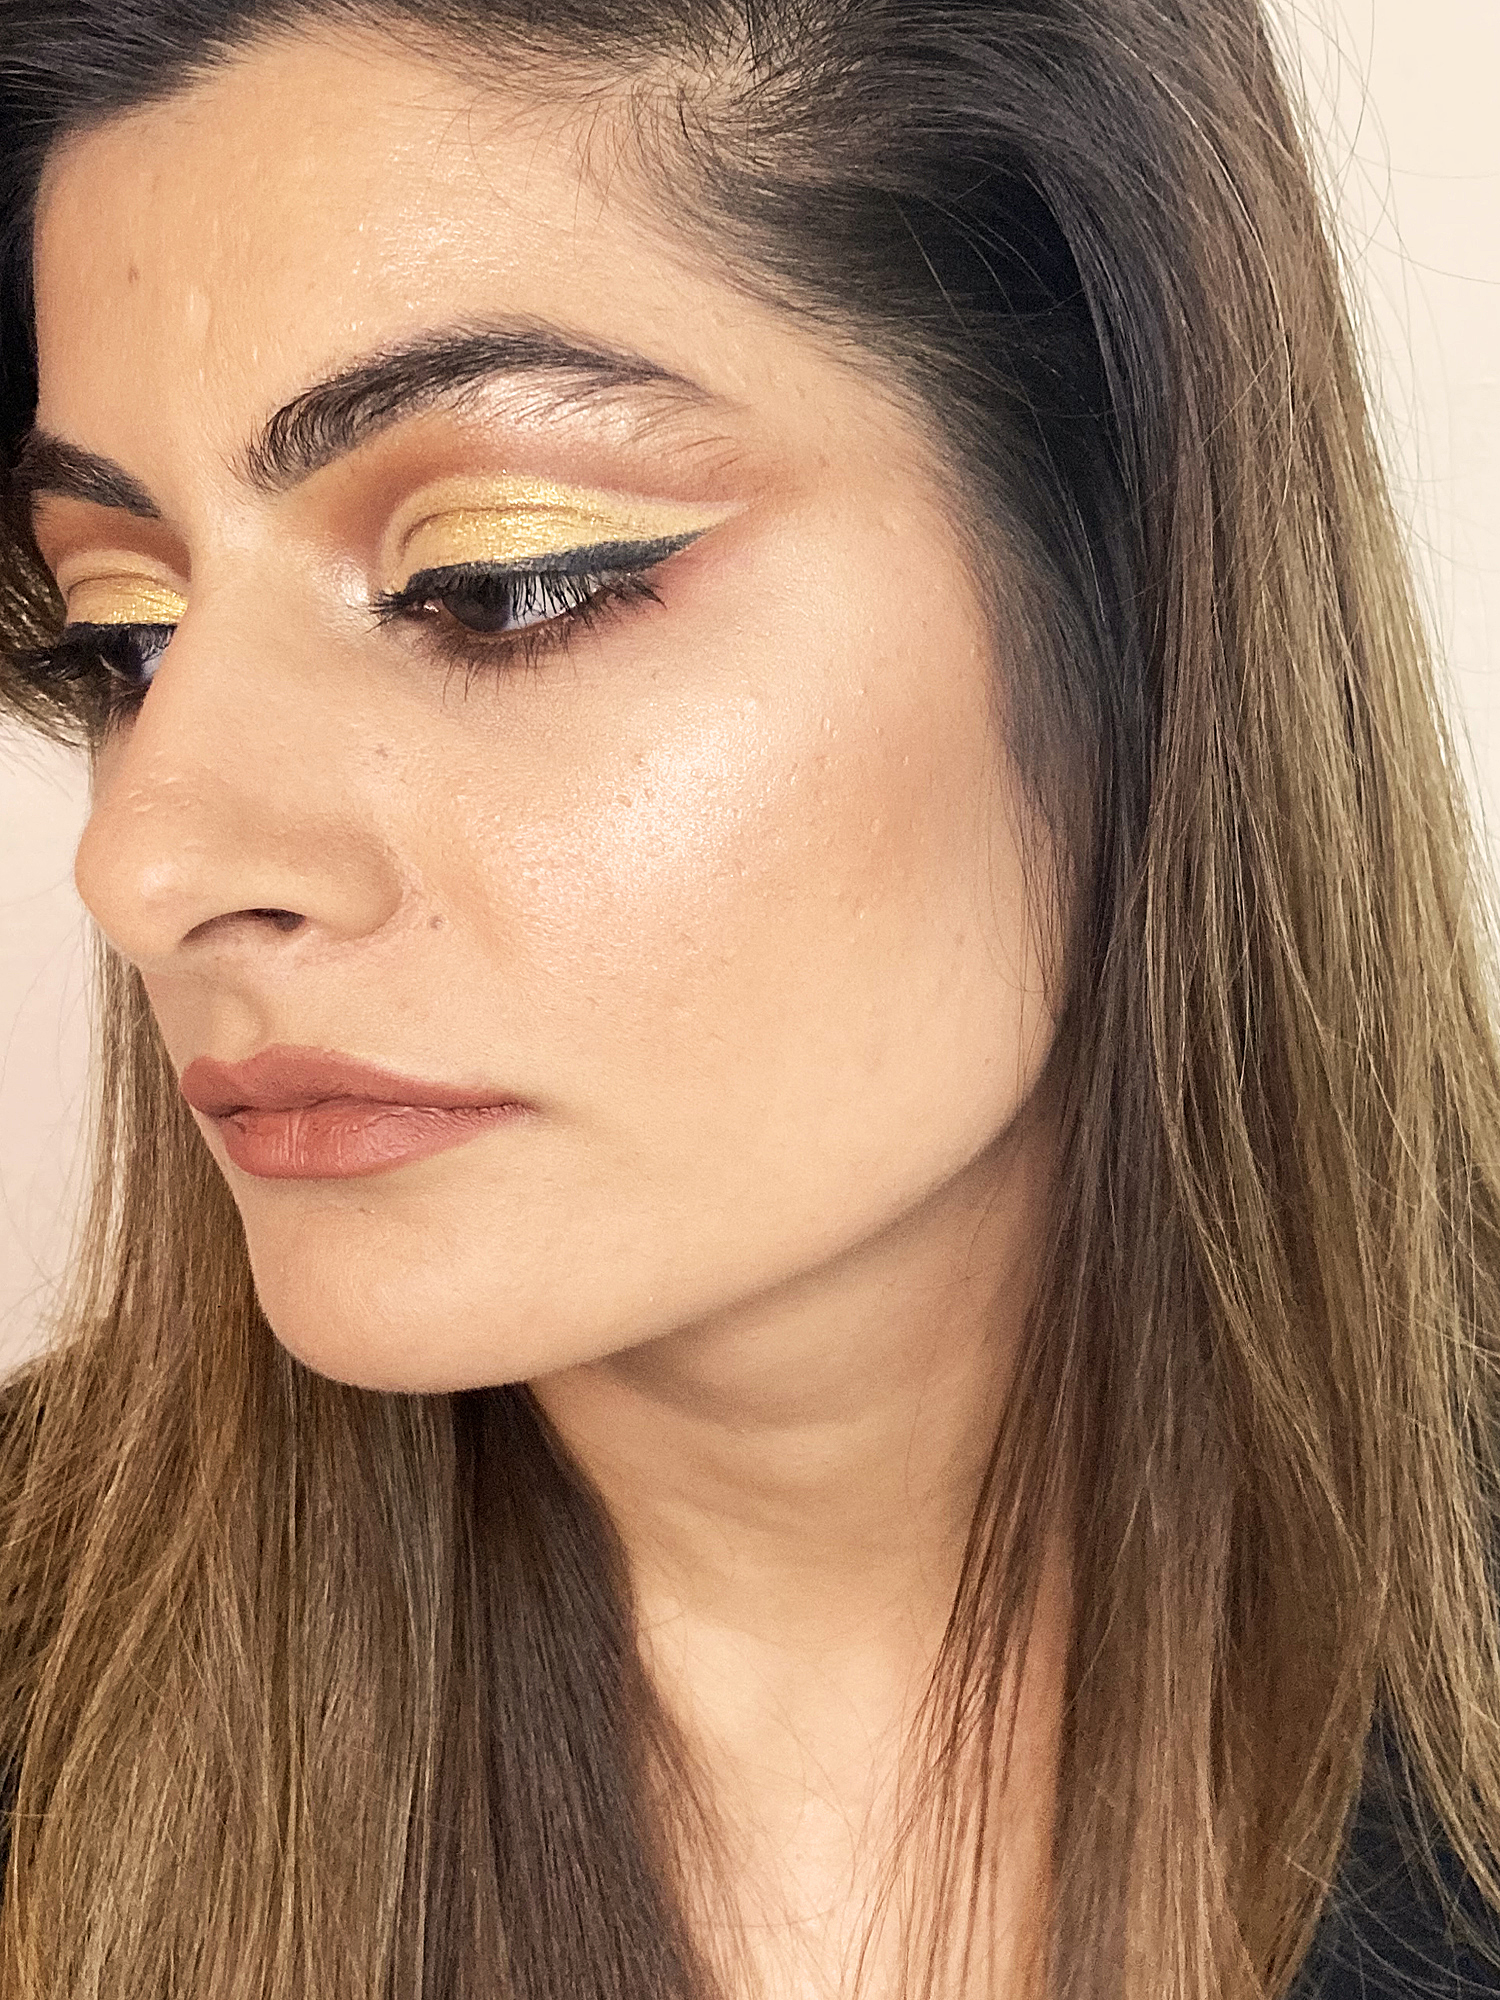 FOTD #4 - My First Ever Cut Crease! (2)